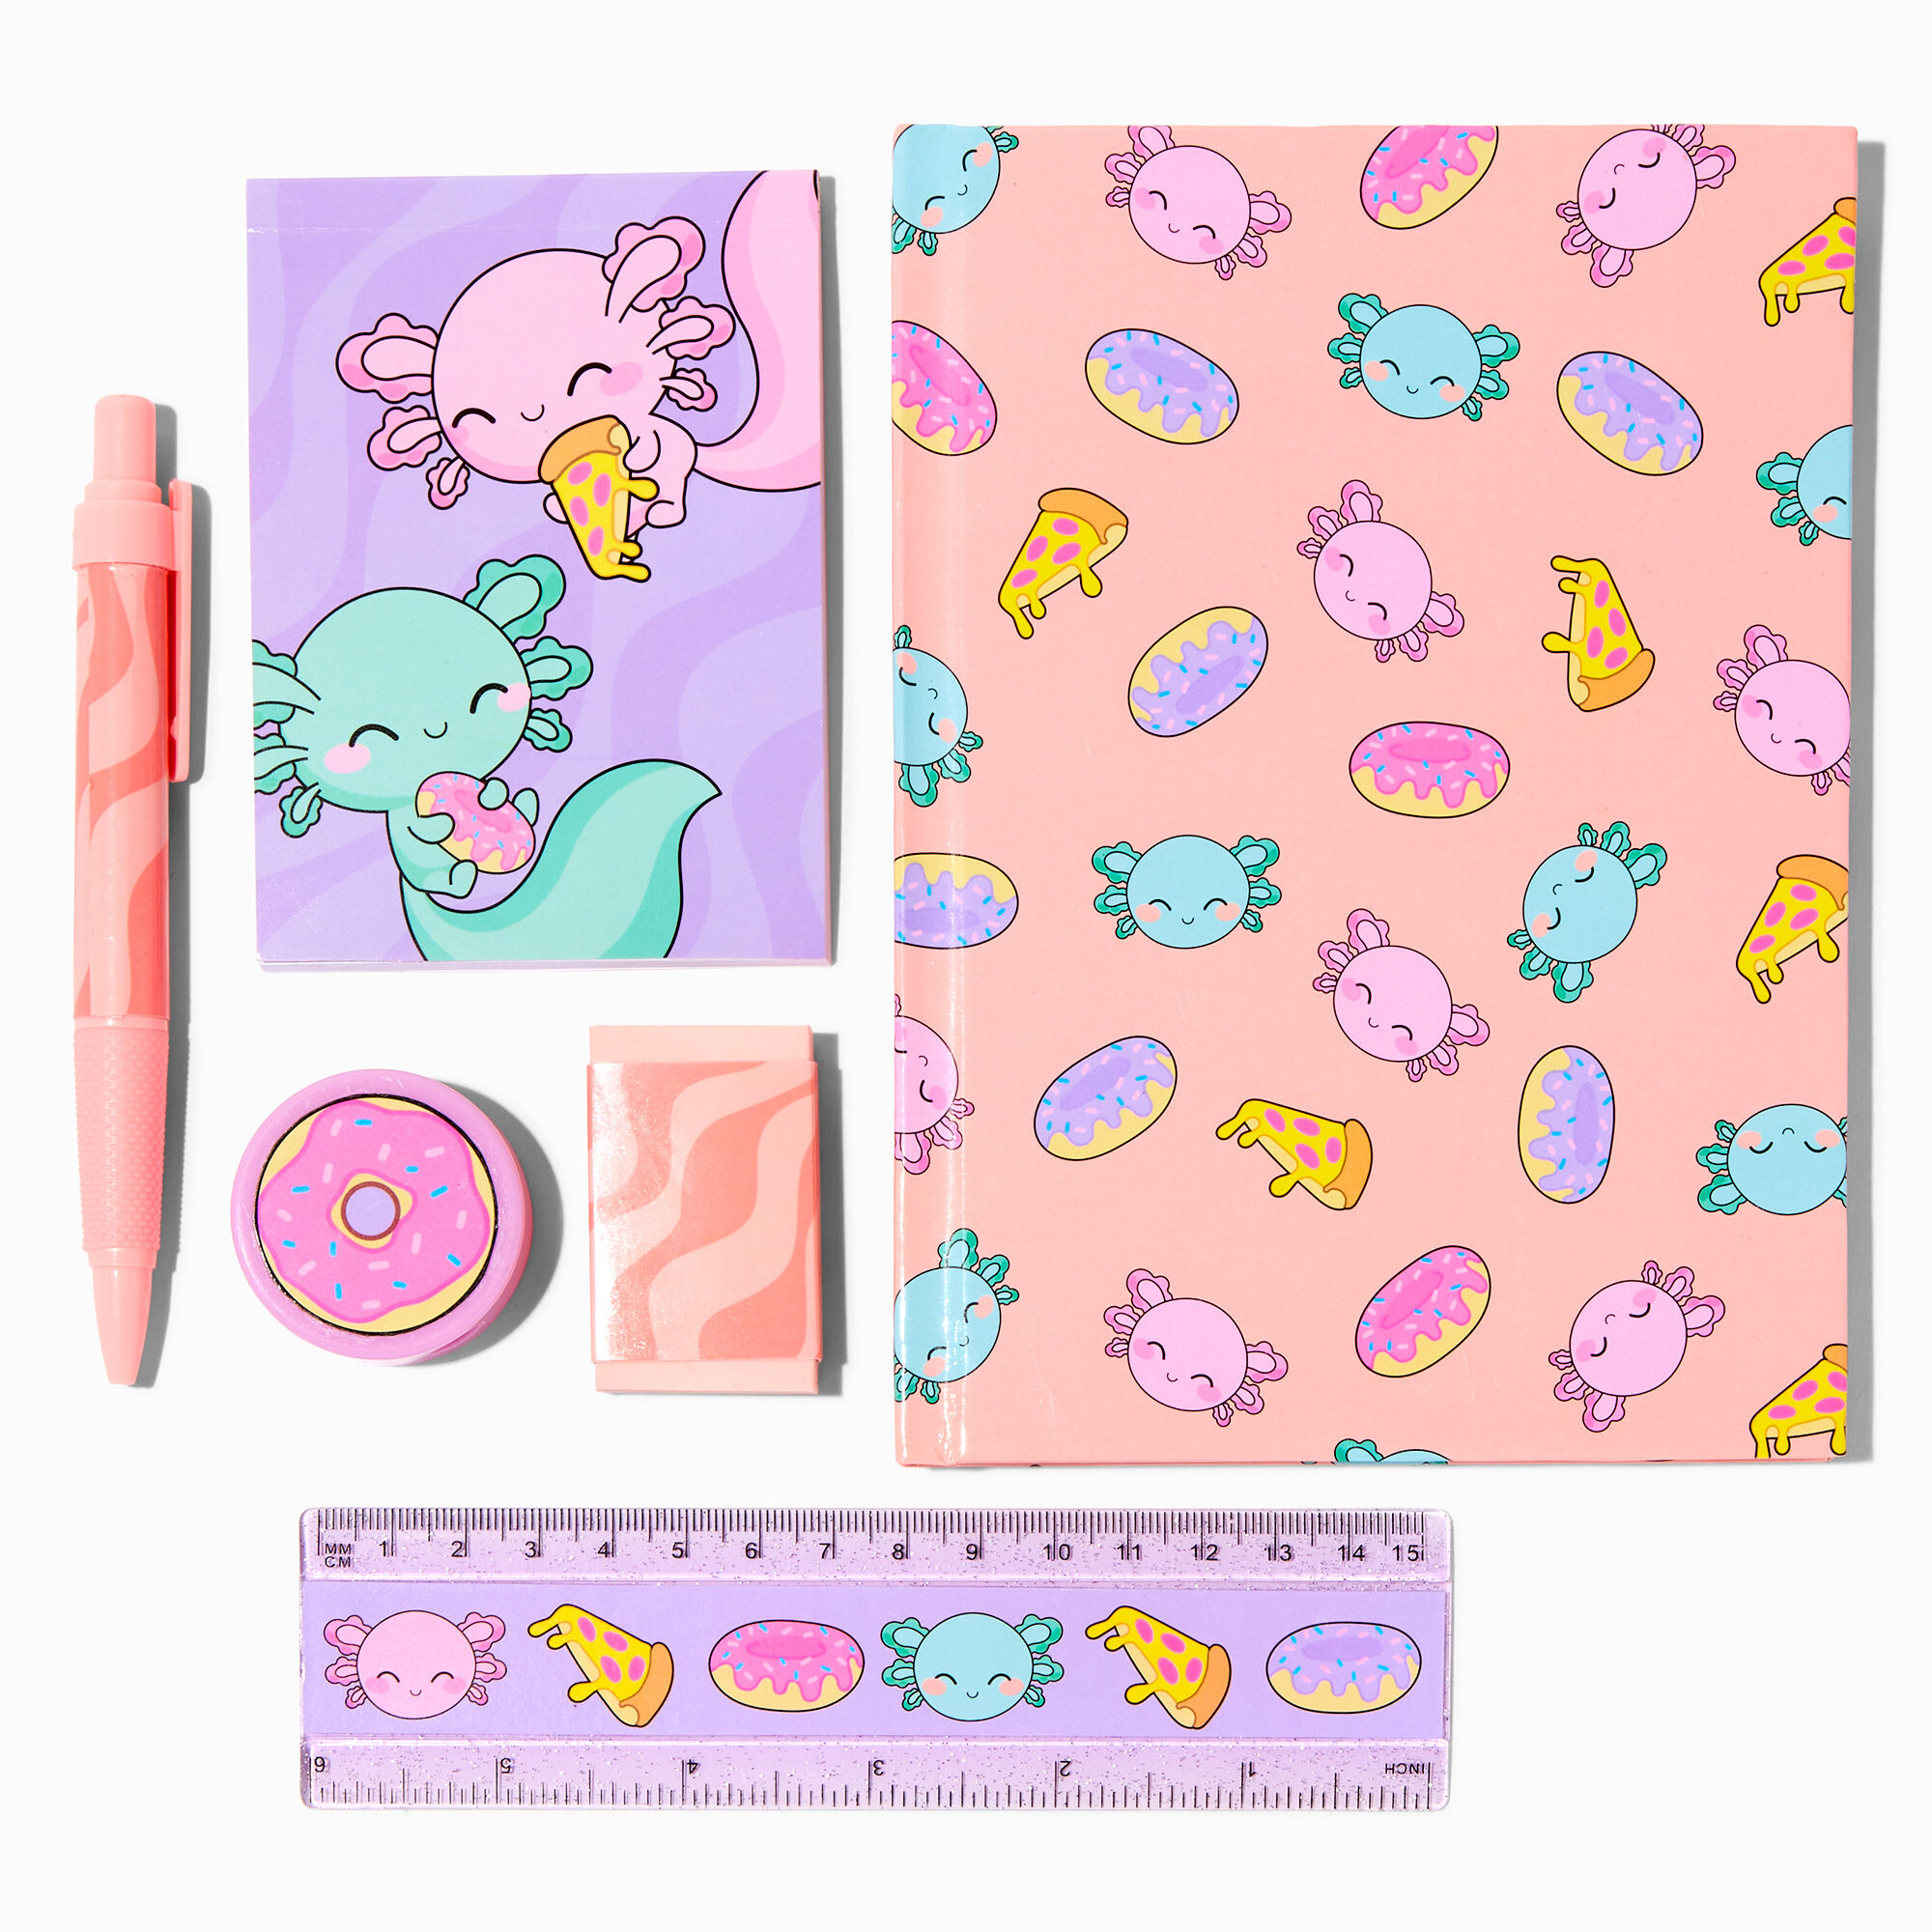 View Claires Donut Axolotl Stationery Set information